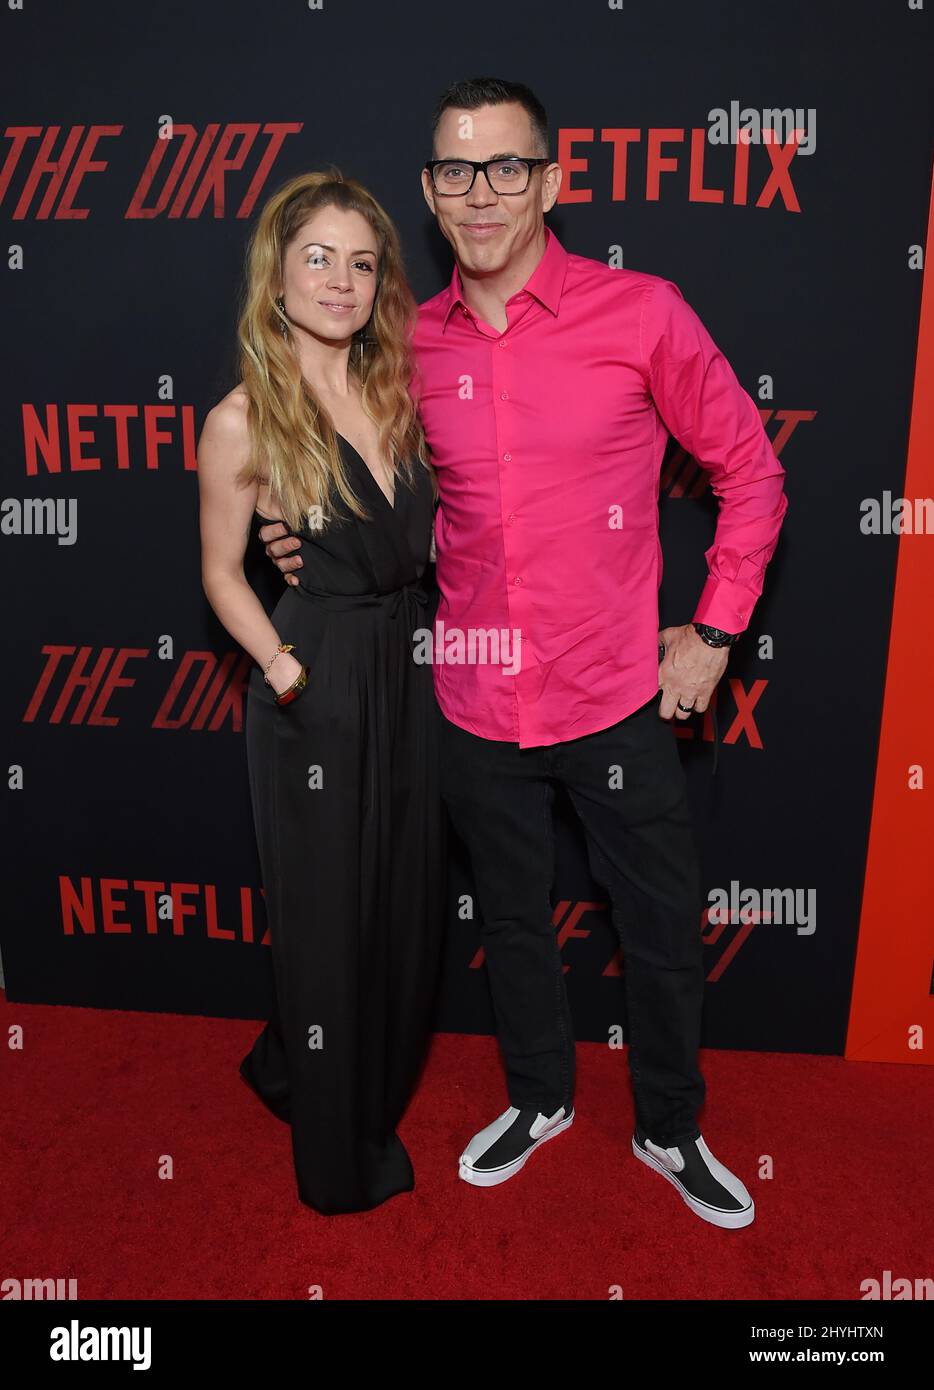 Steve-O and Lux Wright at Netflix's 